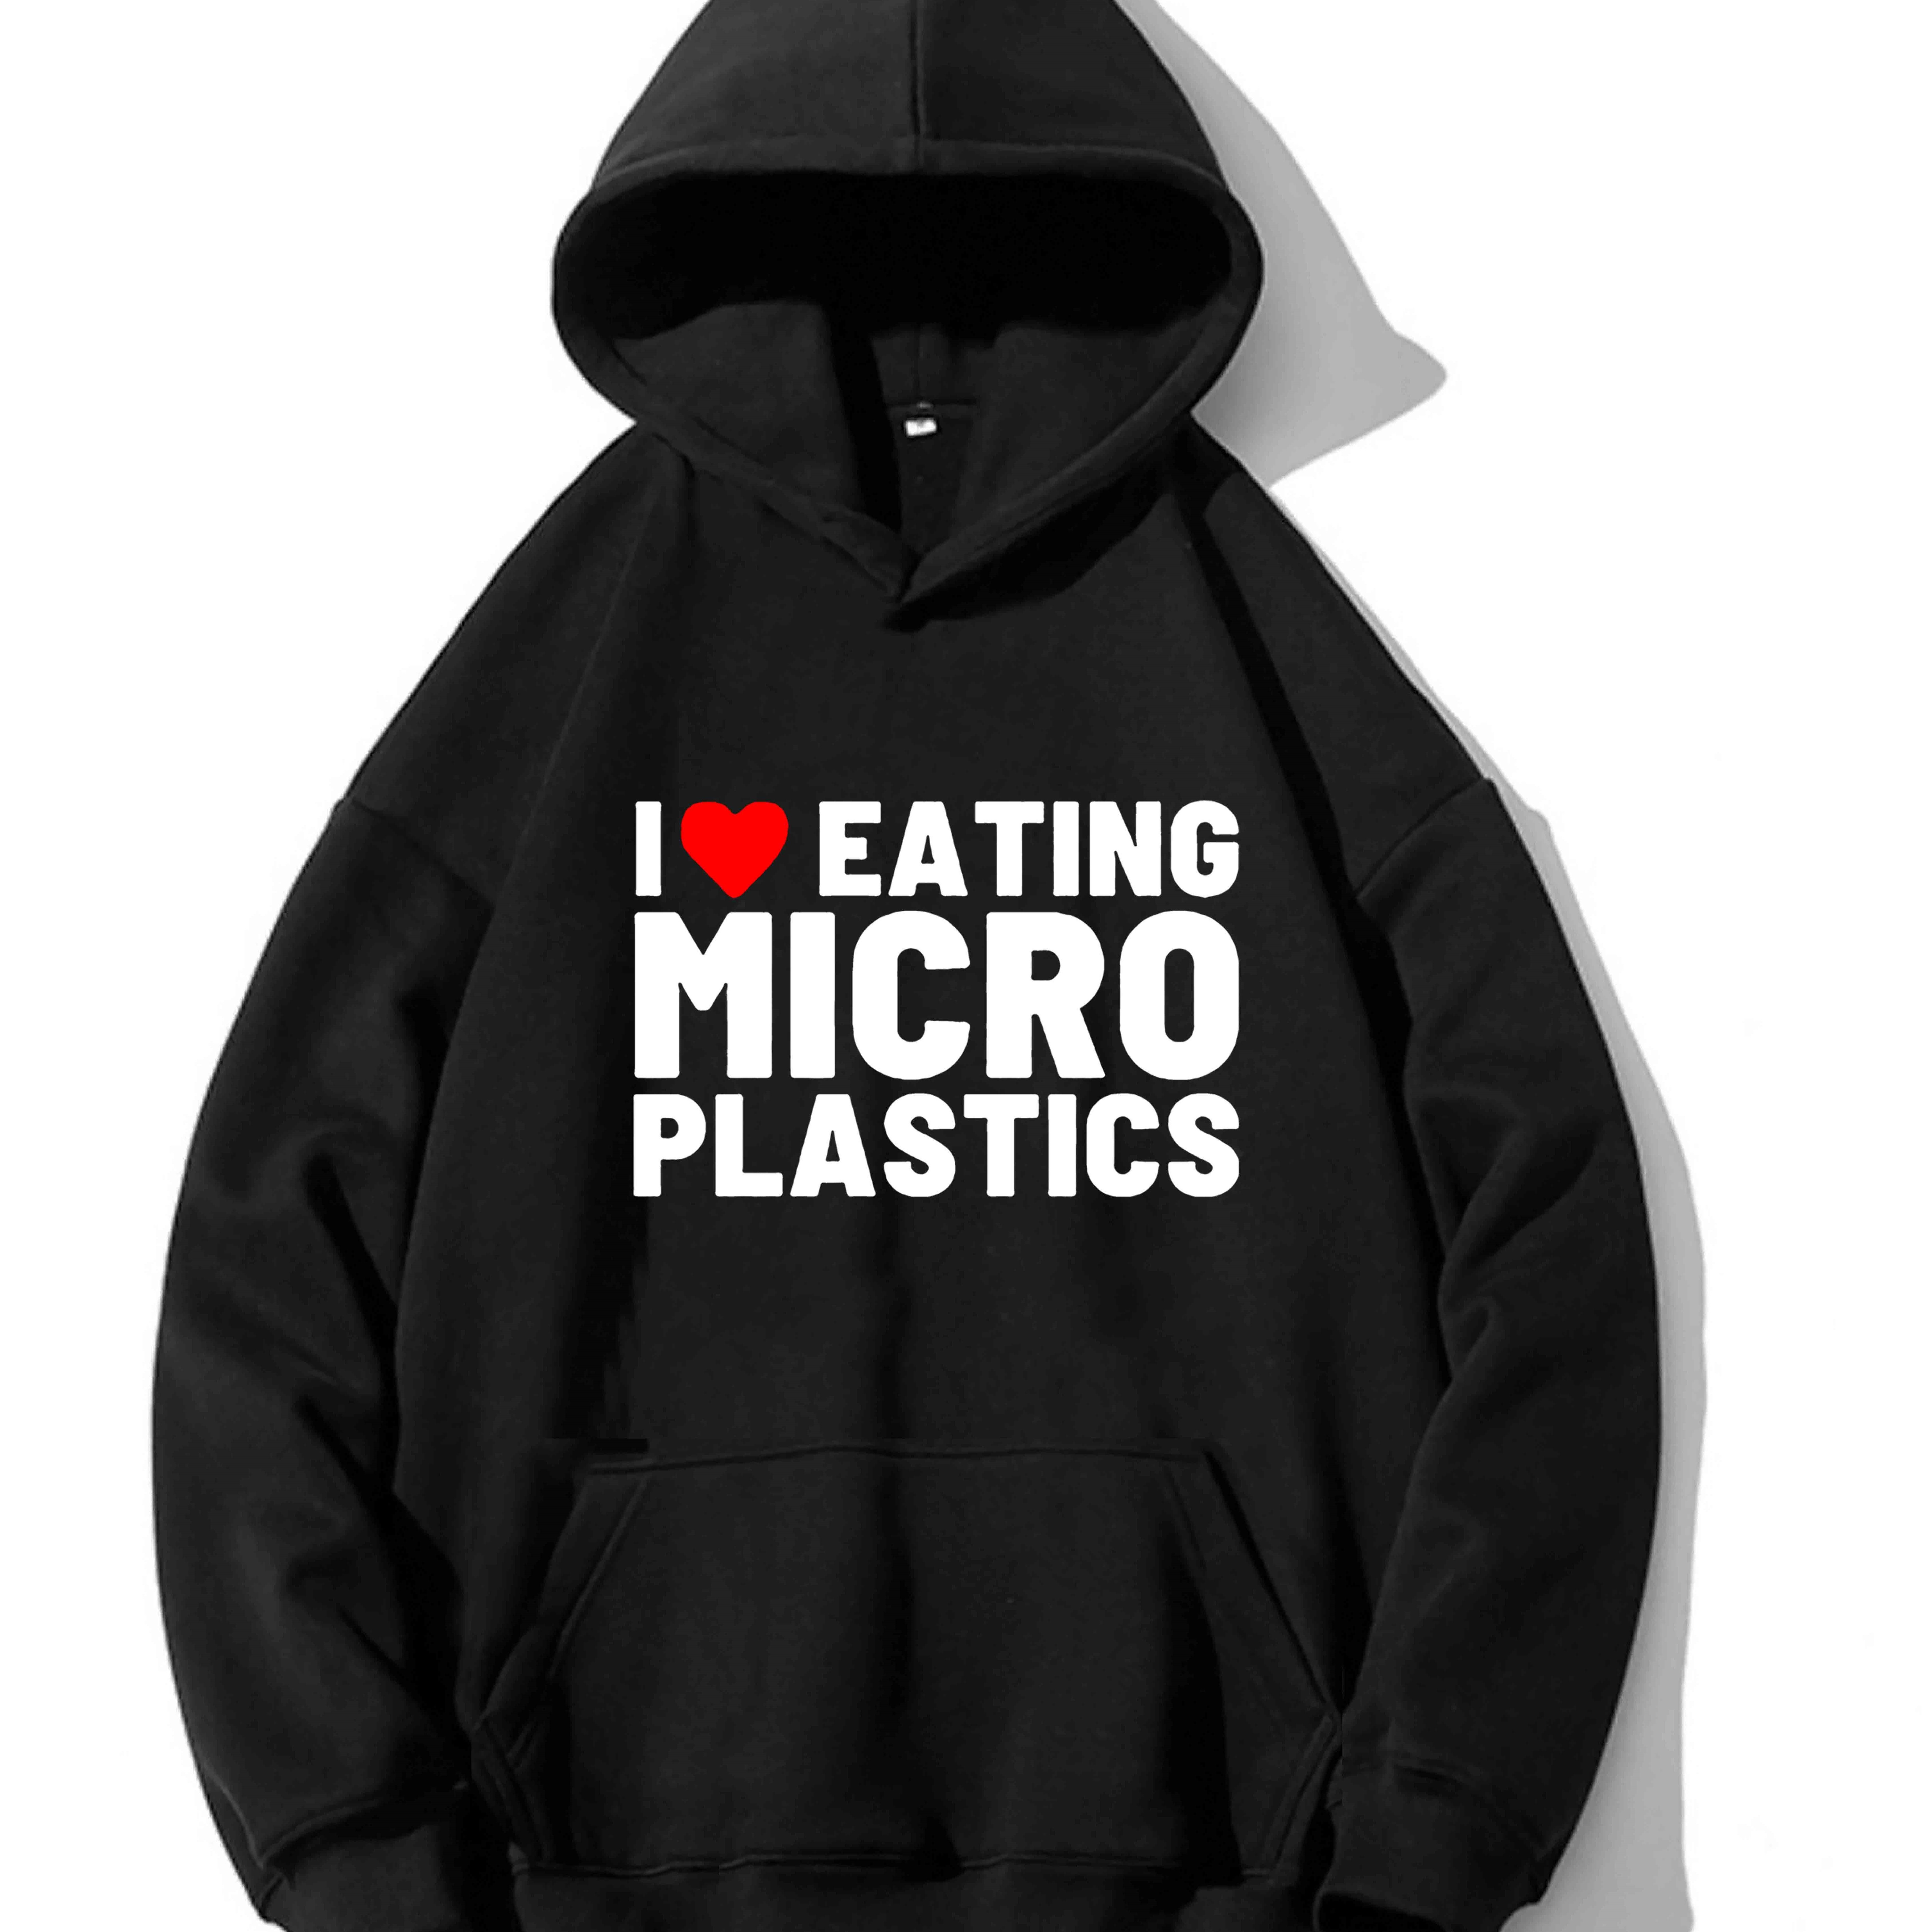 

I Love Micro Plastic Print Men's Punk Style Pullover Round Neck Hoodies With Kangaroo Pocket Long Sleeve Hooded Sweatshirt Loose Casual Top For Autumn Winter Men's Clothing As Gifts